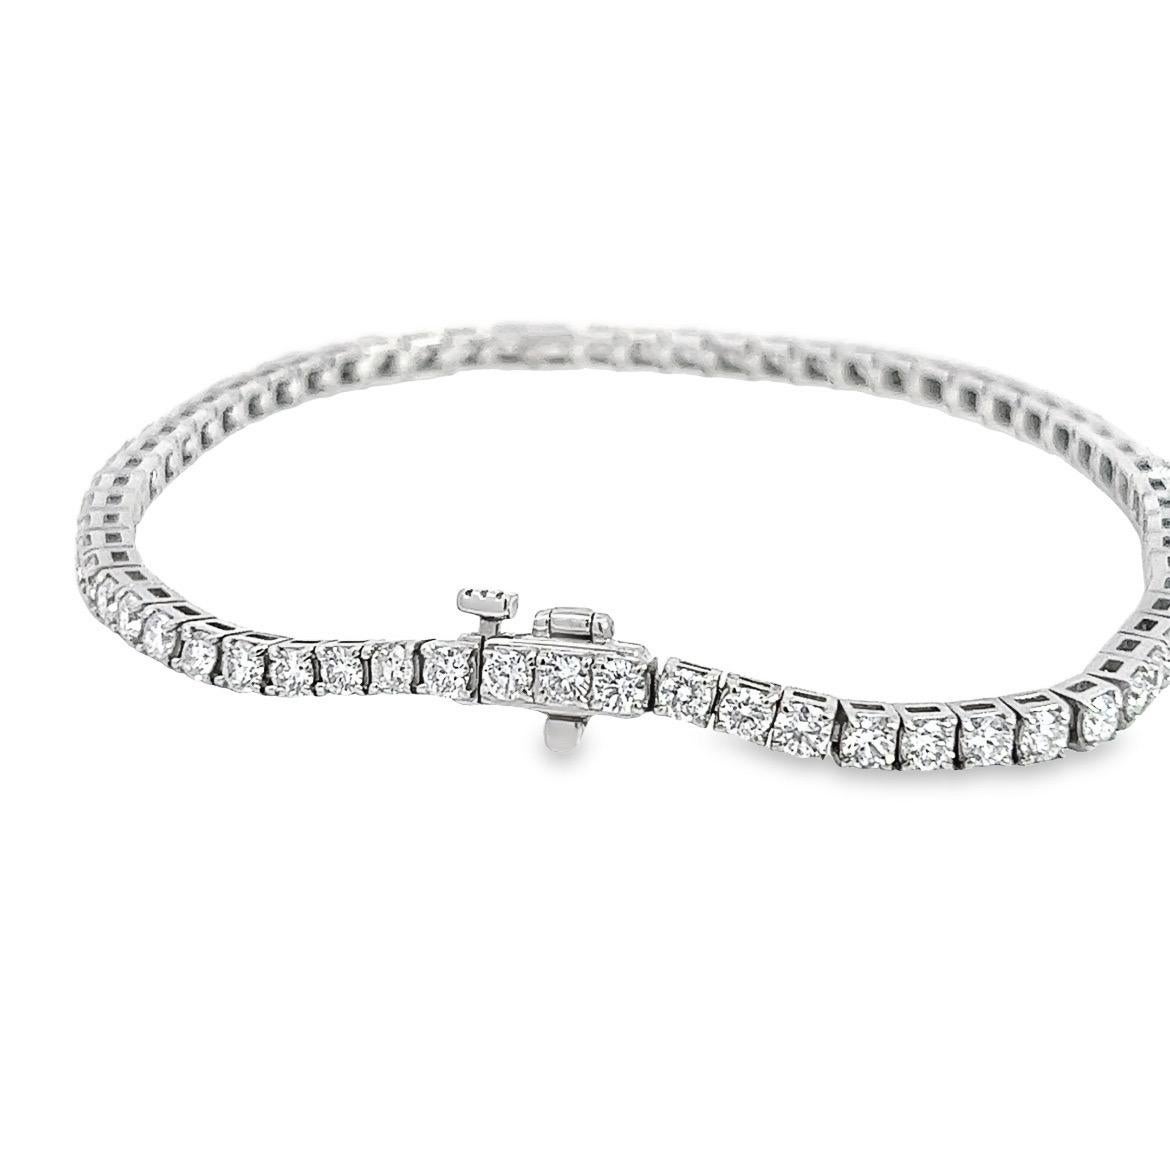 14k White Gold Tennis Bracelet with 4CT of Natural Full Brilliant Cut Diamonds 
Classic, high quality, perfect for every occasion.
Natural Full Brilliant Cut Diamonds 
14k White Gold
4 prongs setting
Number of Diamonds: 65
Total Diamonds Weight: